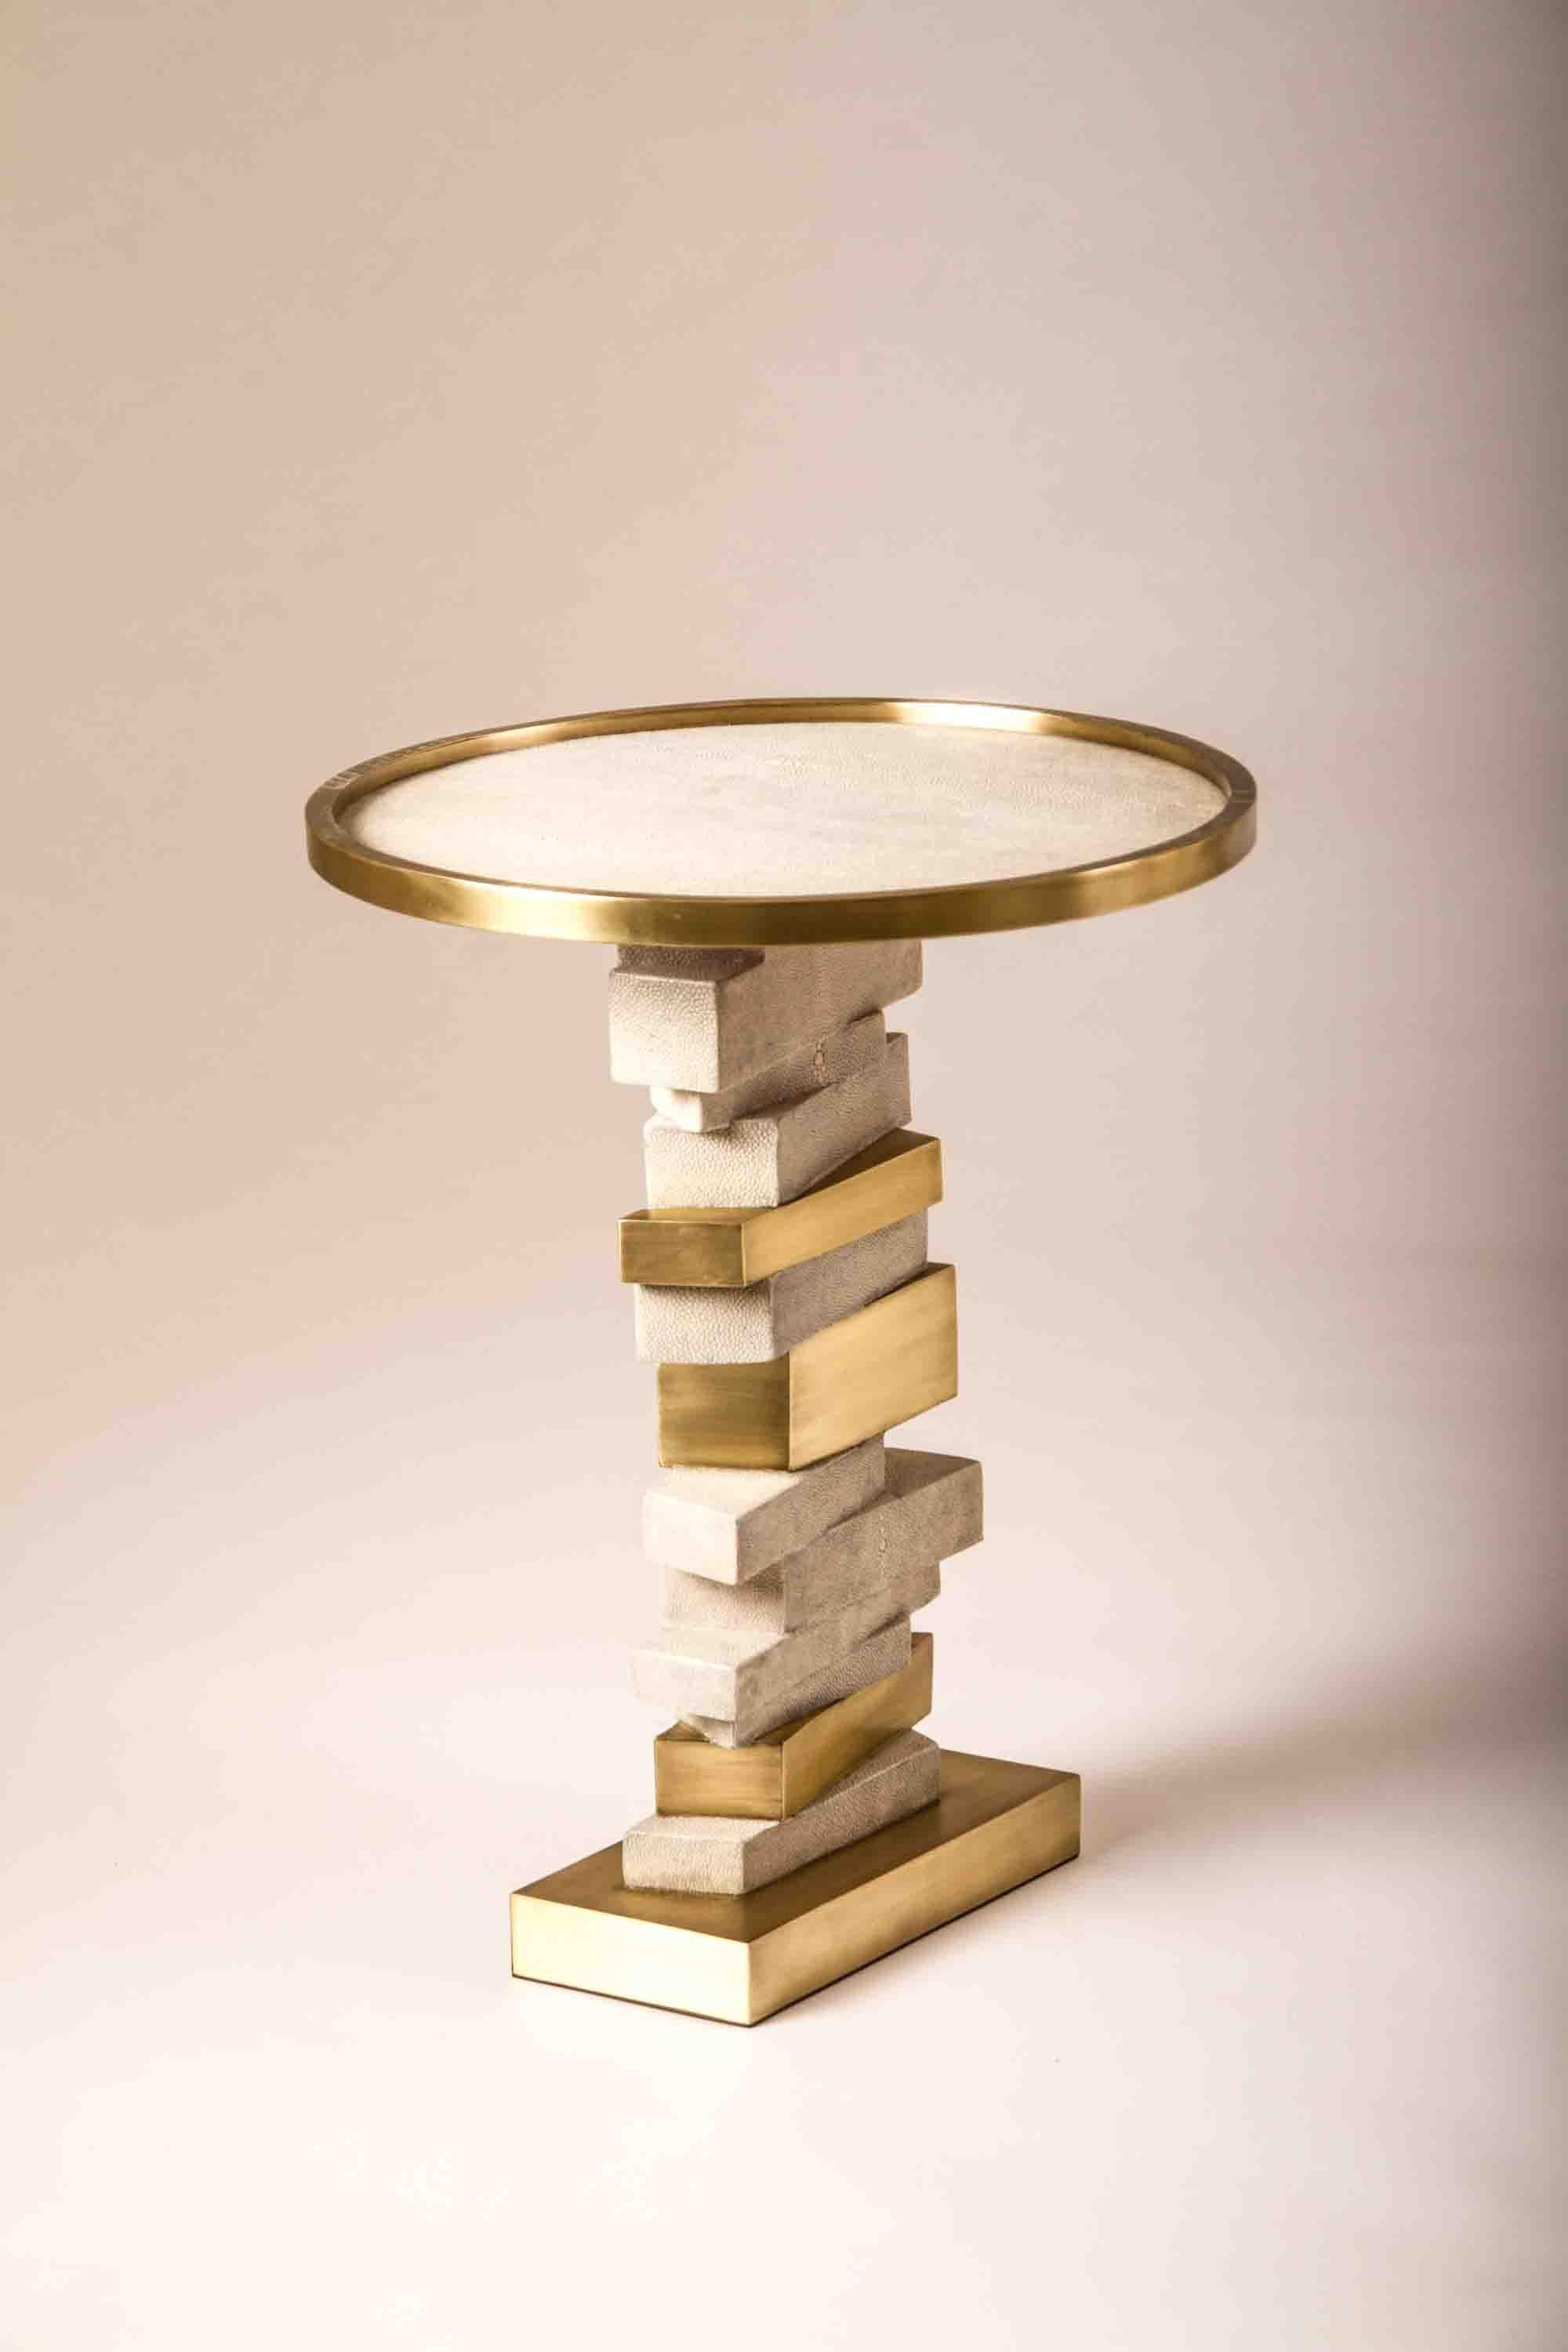 The Bullion side table is inspired by stacked gold bars. The top of the table is inlaid in cream shagreen with a bronze-patina brass frame. The stacked inspired gold bars are inlaid in a mixture of shagreen and brass. This piece makes for a playful